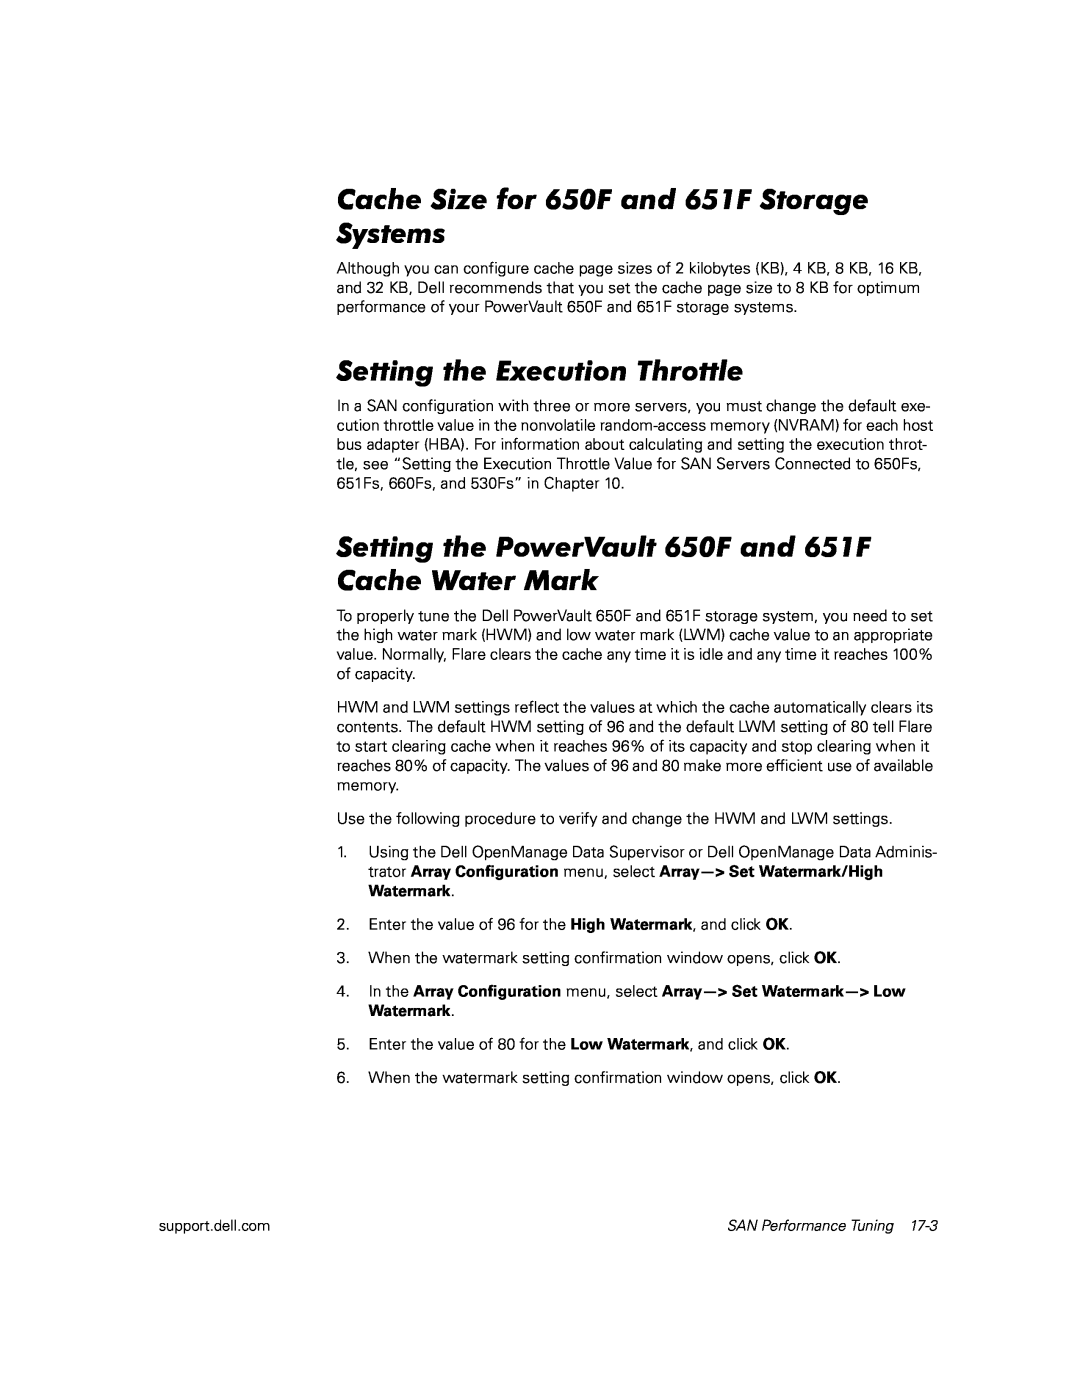 Dell manual Cache Size for 650F and 651F Storage Systems, Setting the Execution Throttle 